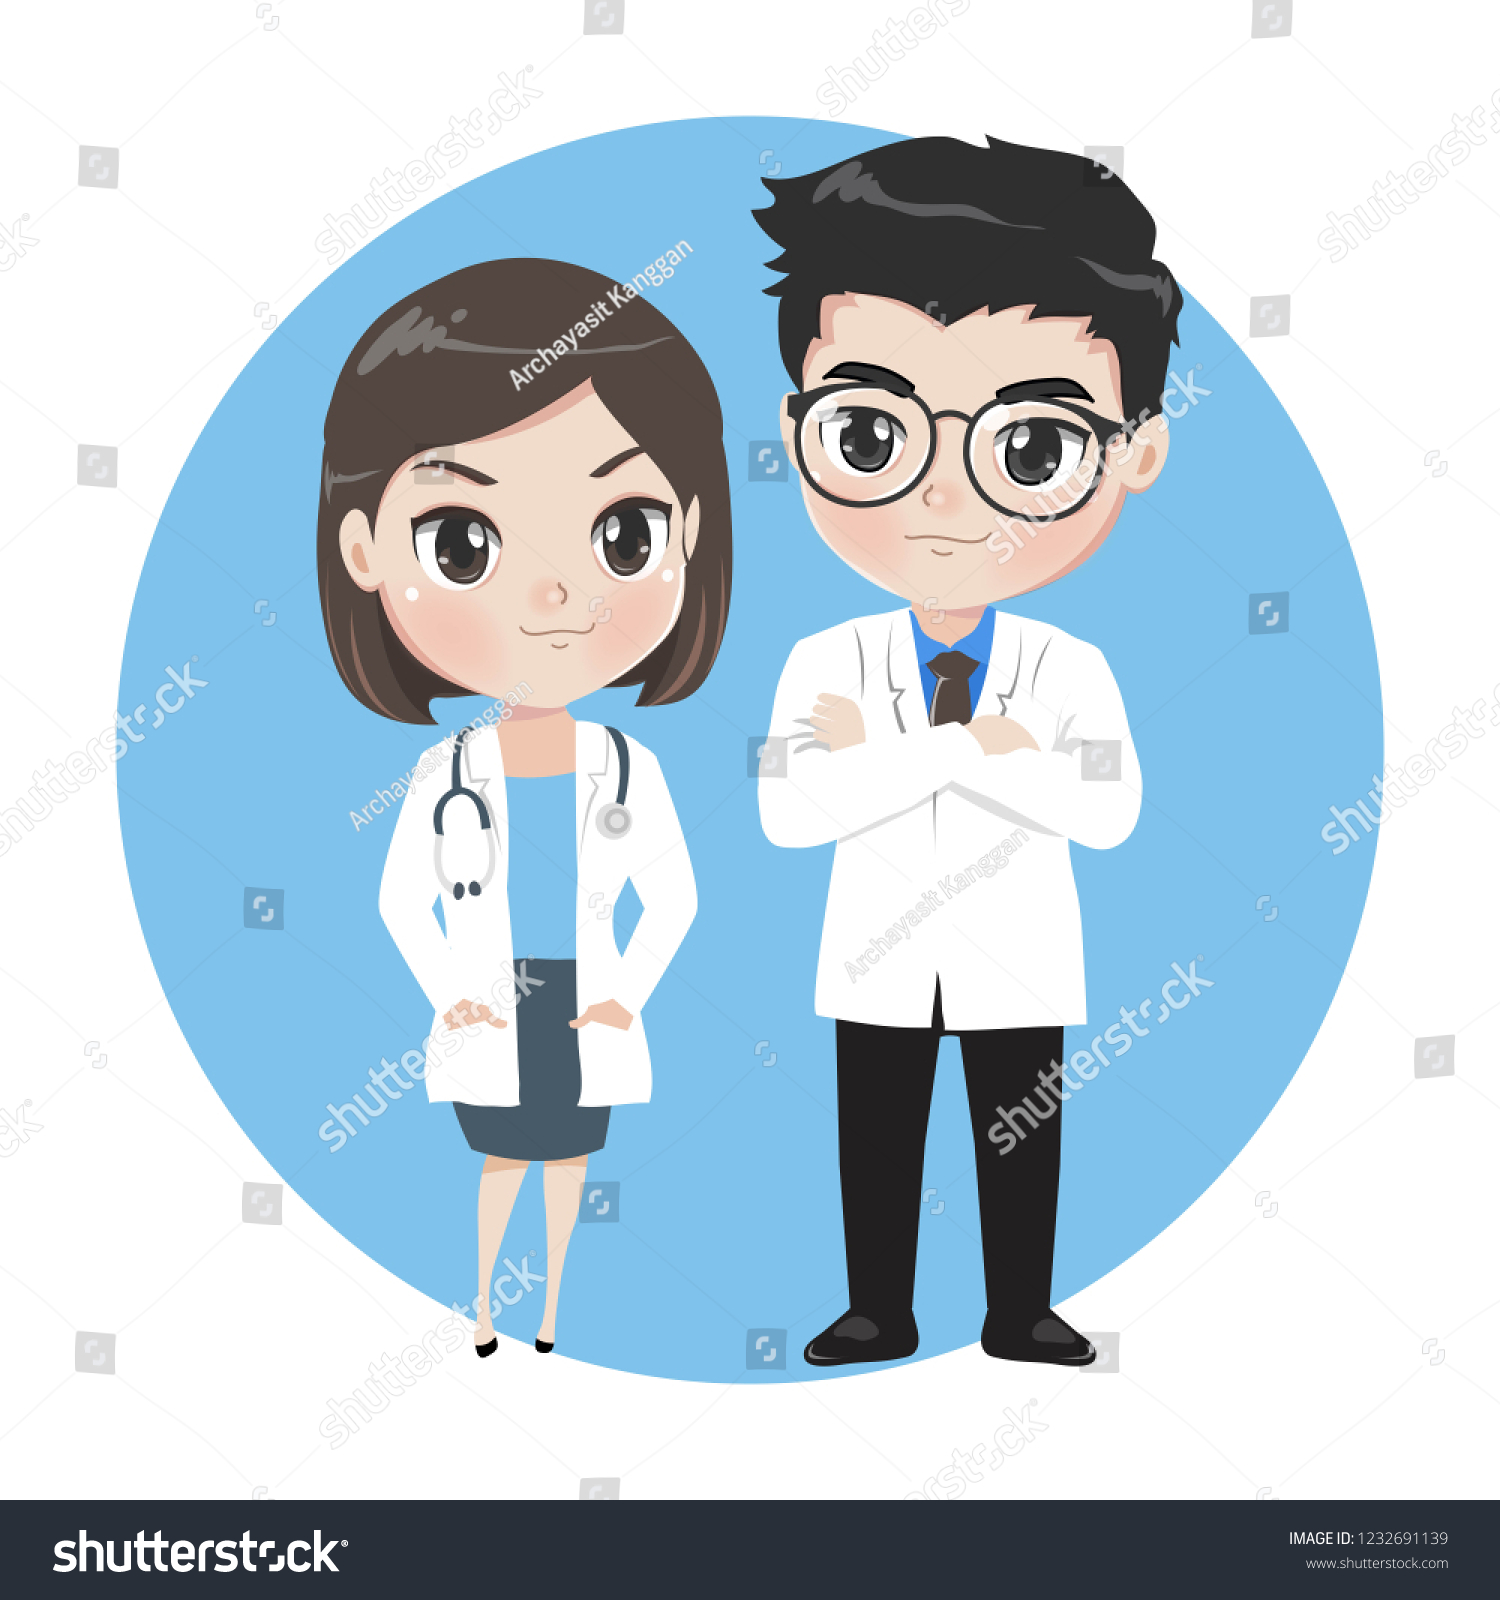 Male Female Doctors Cartoon Characters Stock Vector Royalty Free 1232691139 Shutterstock